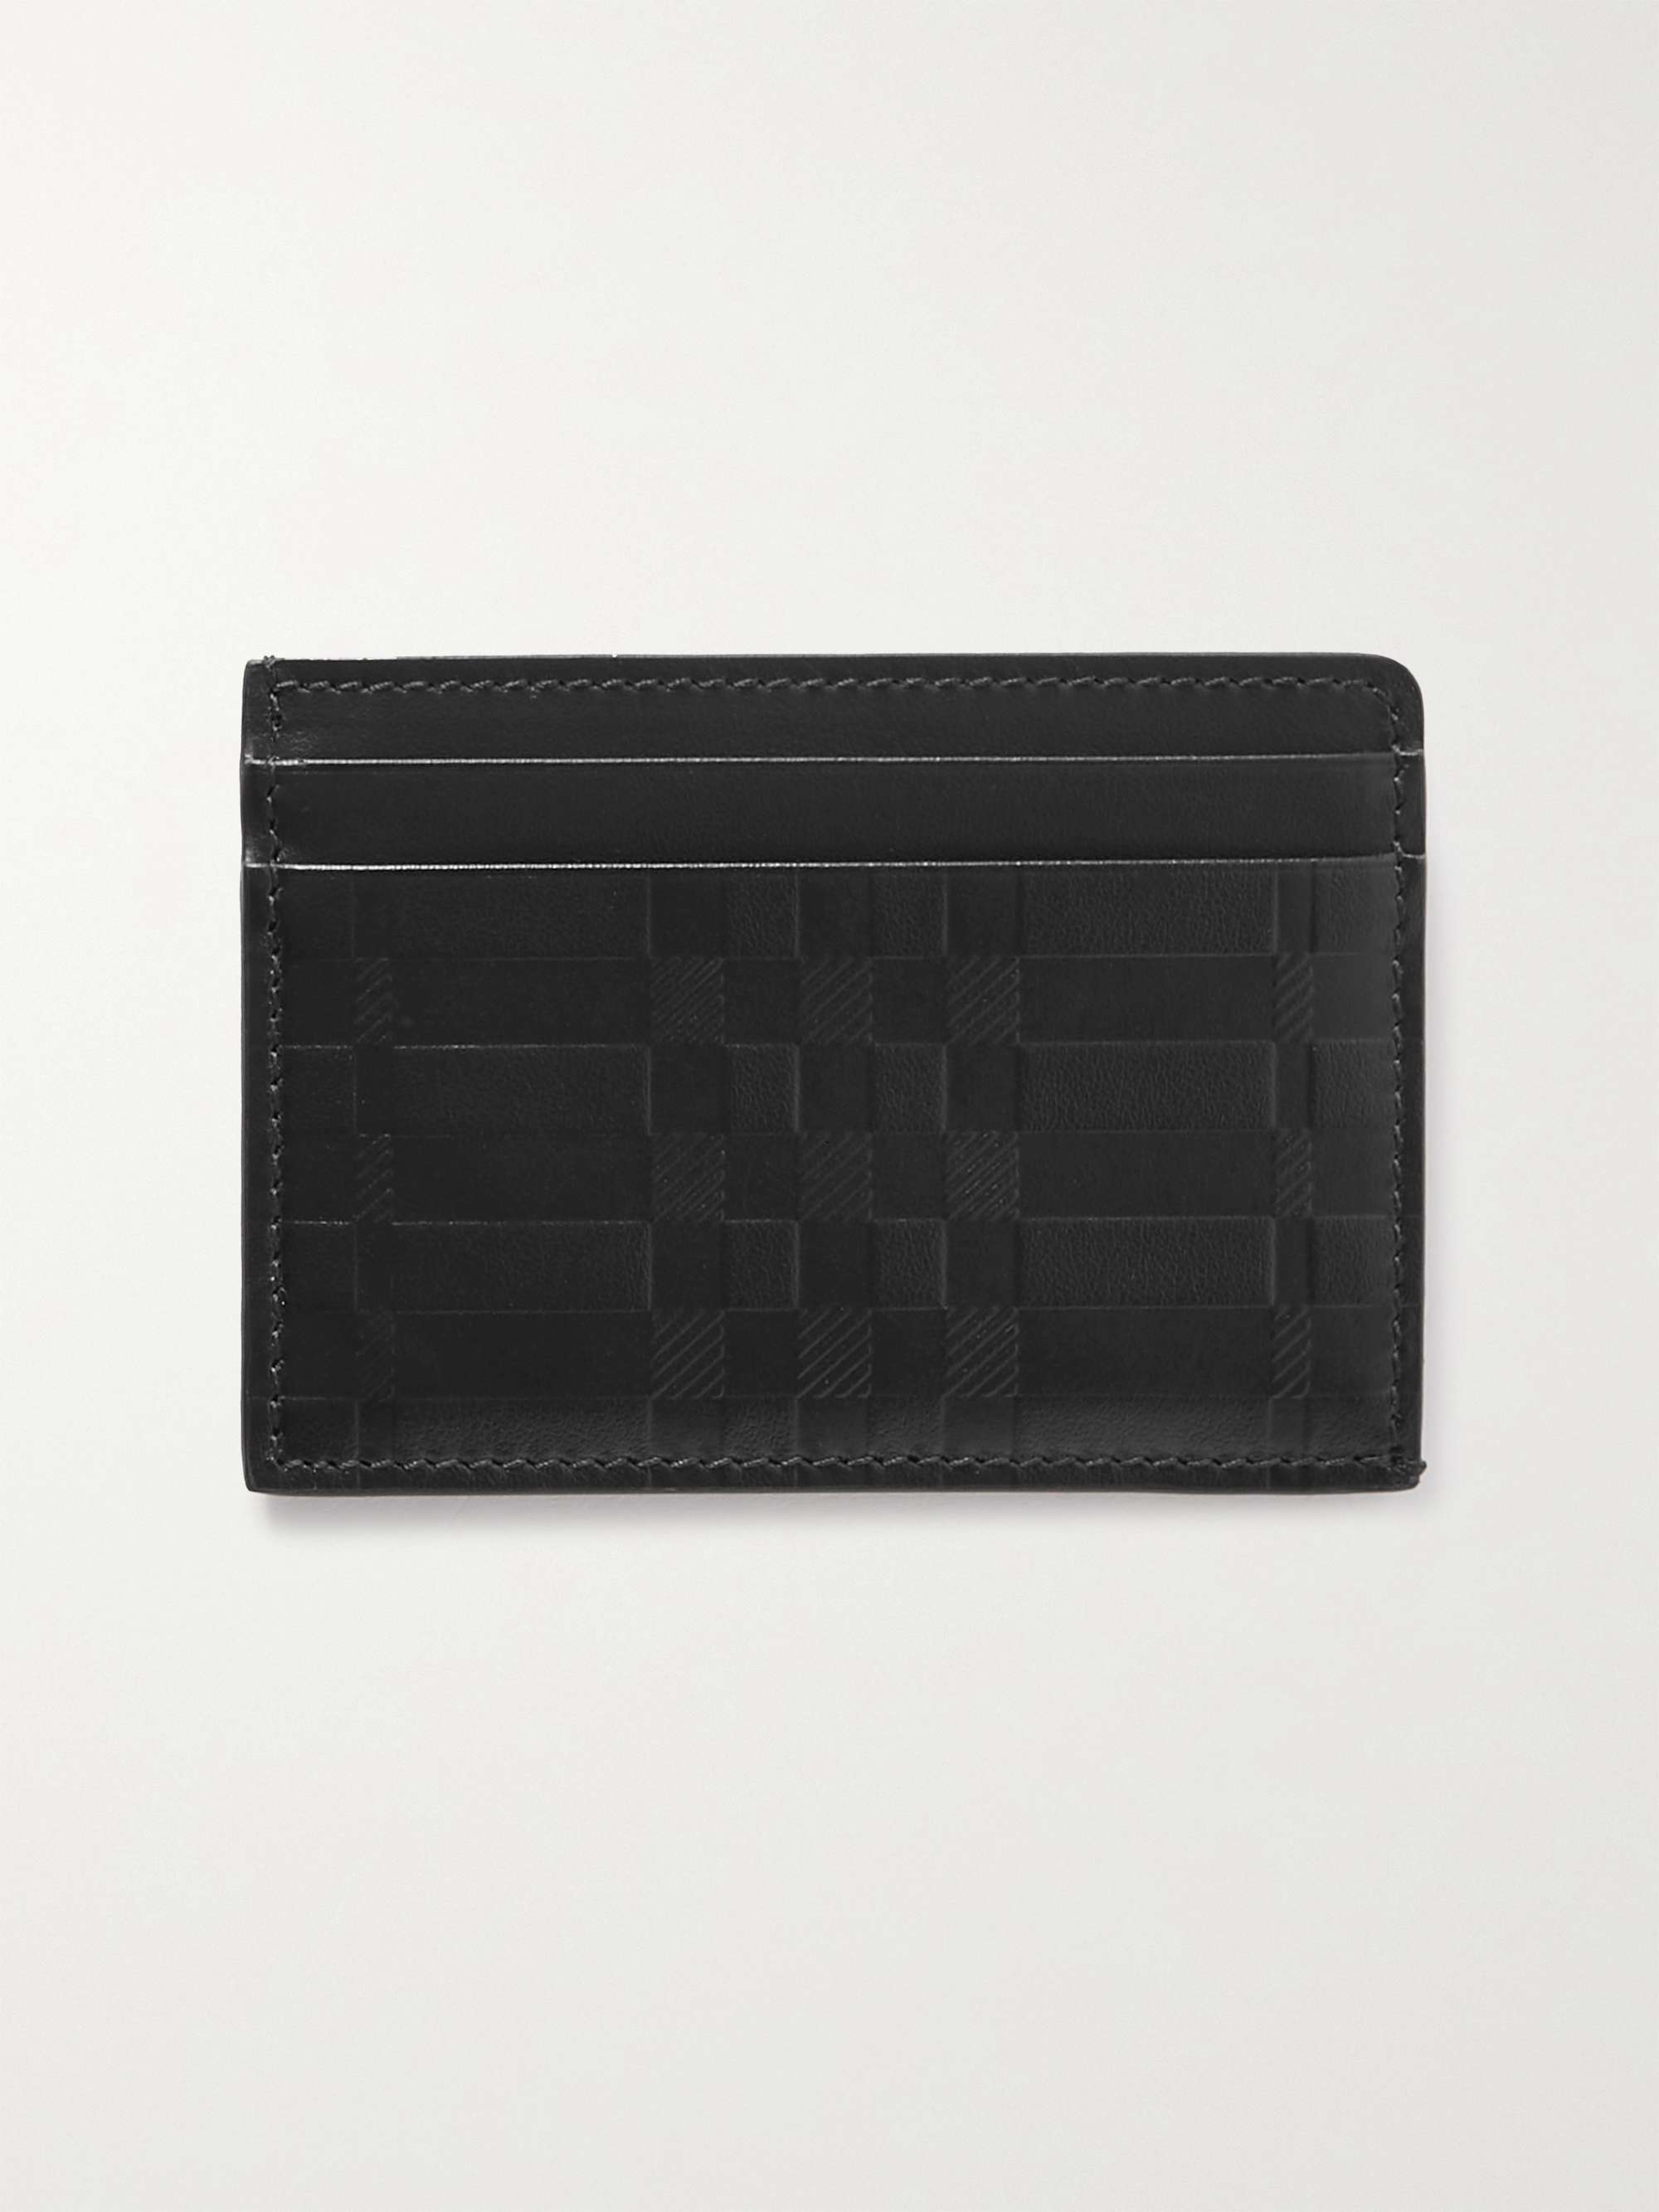 BURBERRY Embossed Leather Cardholder